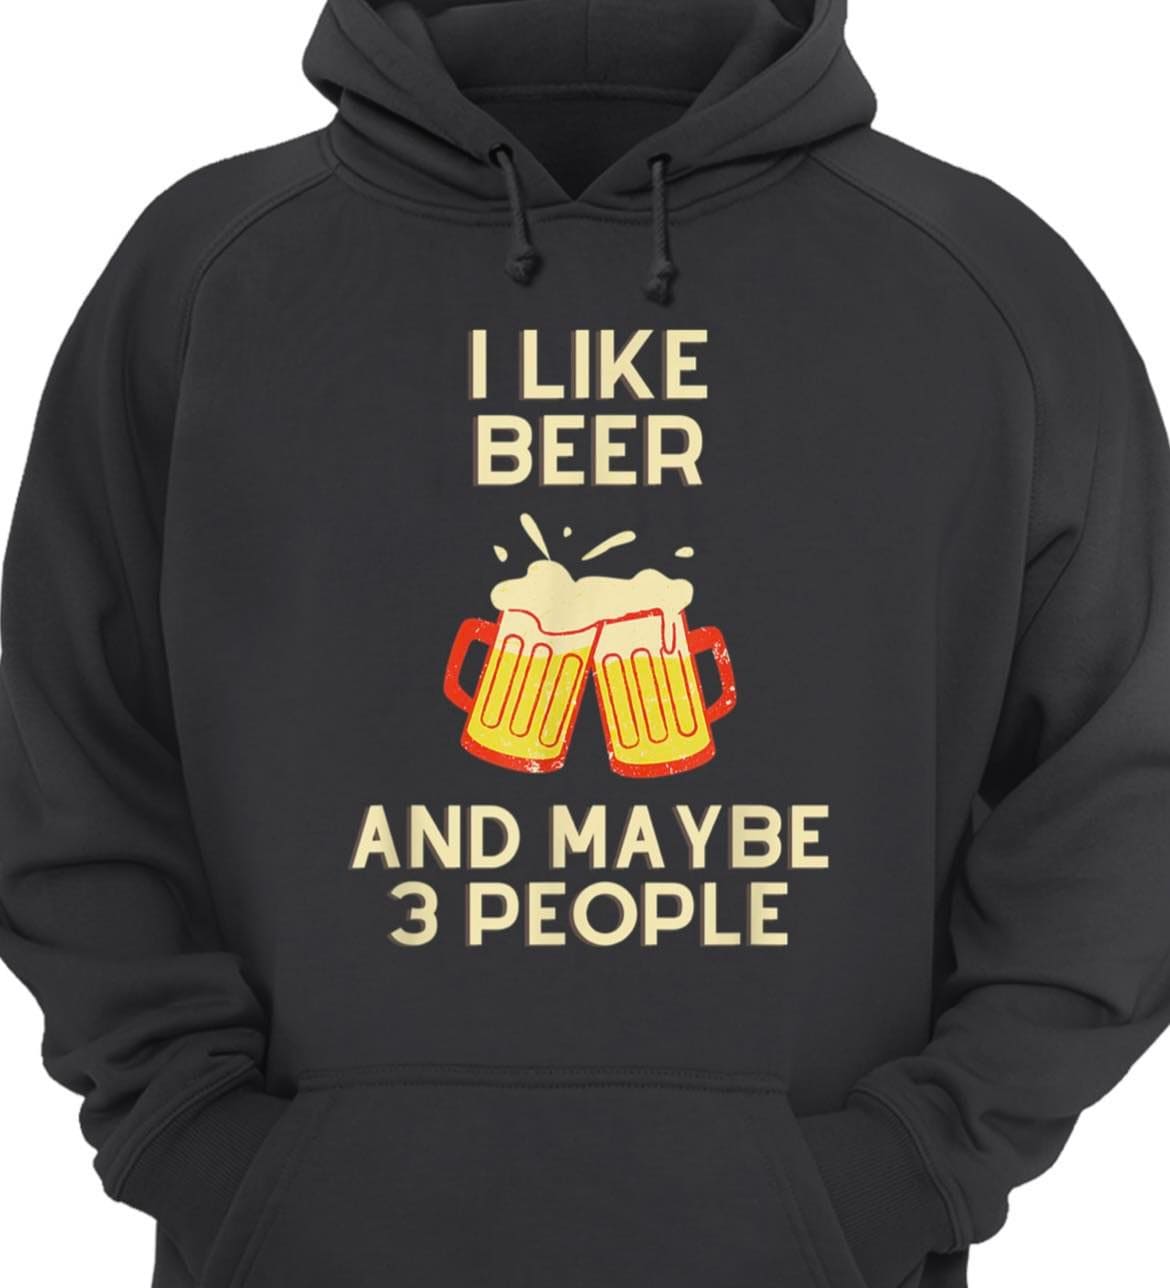 I like beer and maybe 3 people - 3some and beer, gift for beer drinker